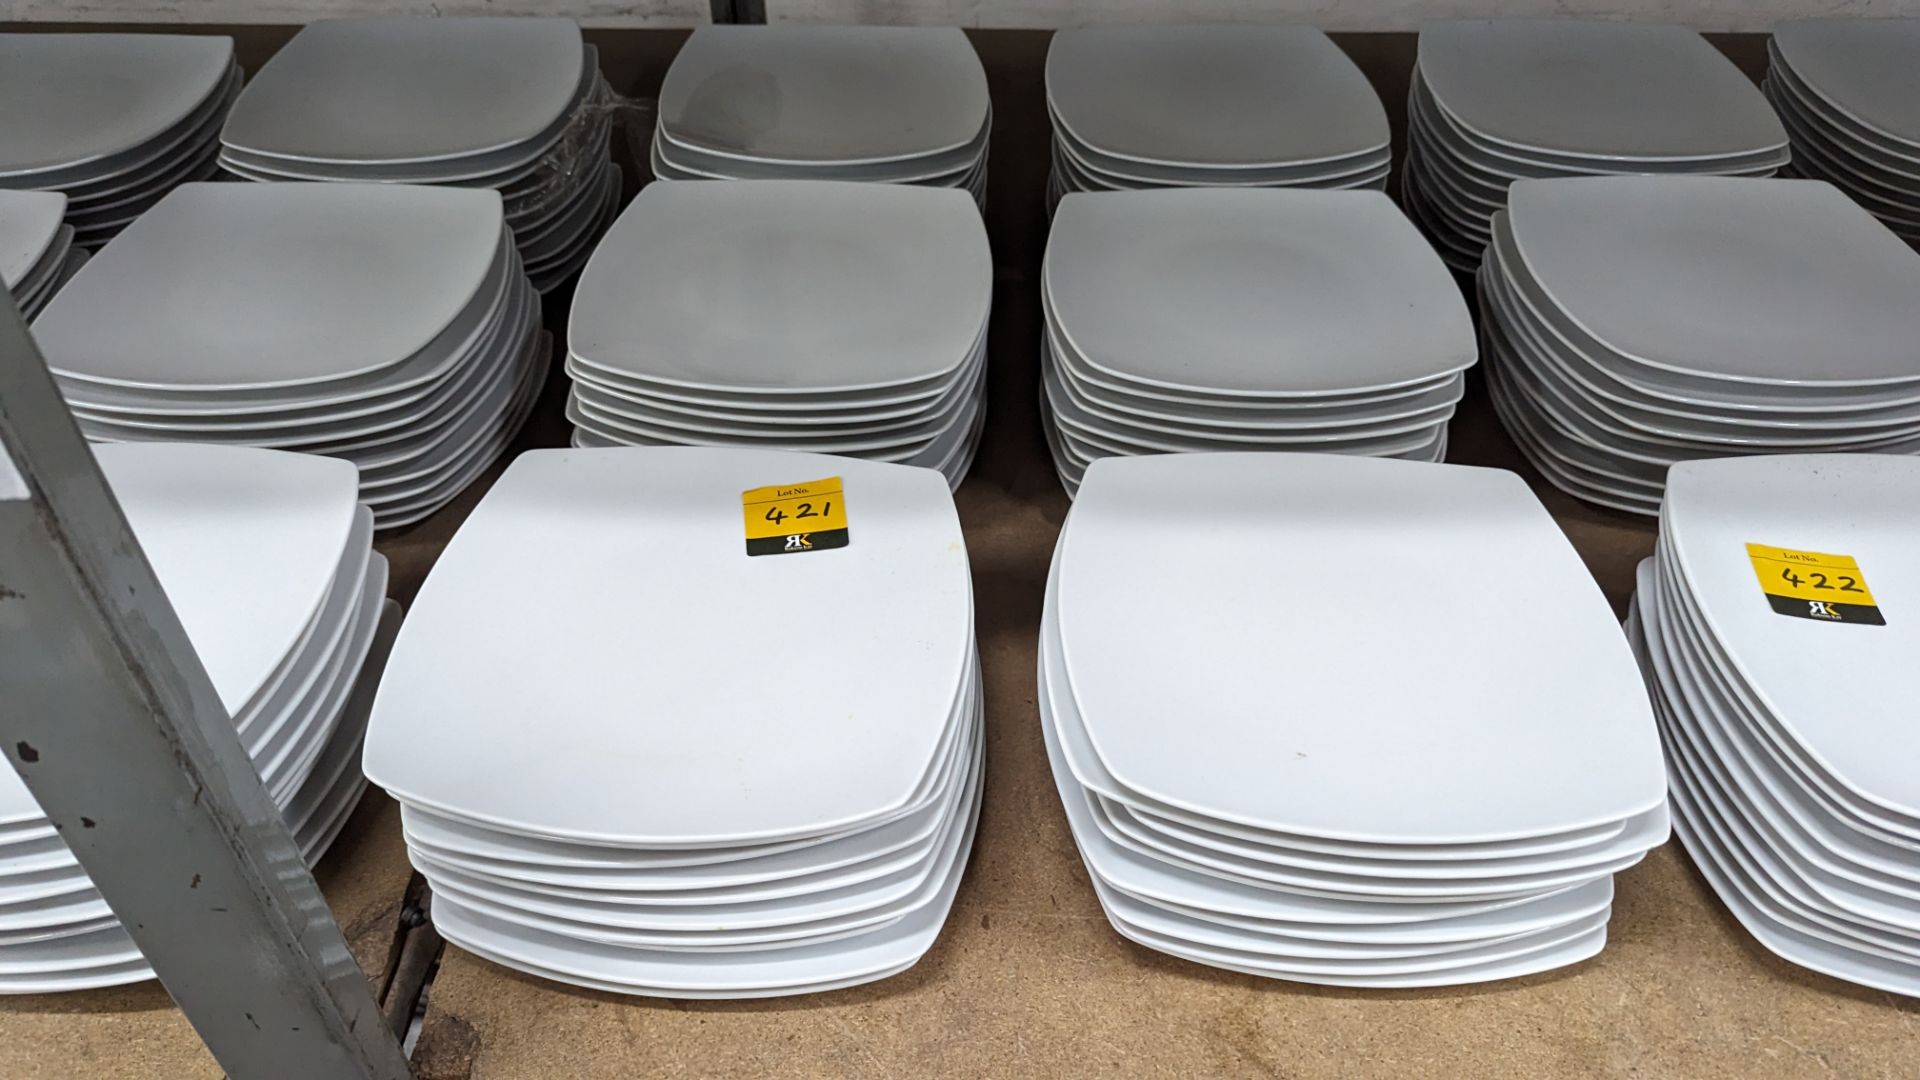 60 off white "squarish" plates with curved sides, each measuring approximately 255mm square - 6 stac - Image 2 of 6